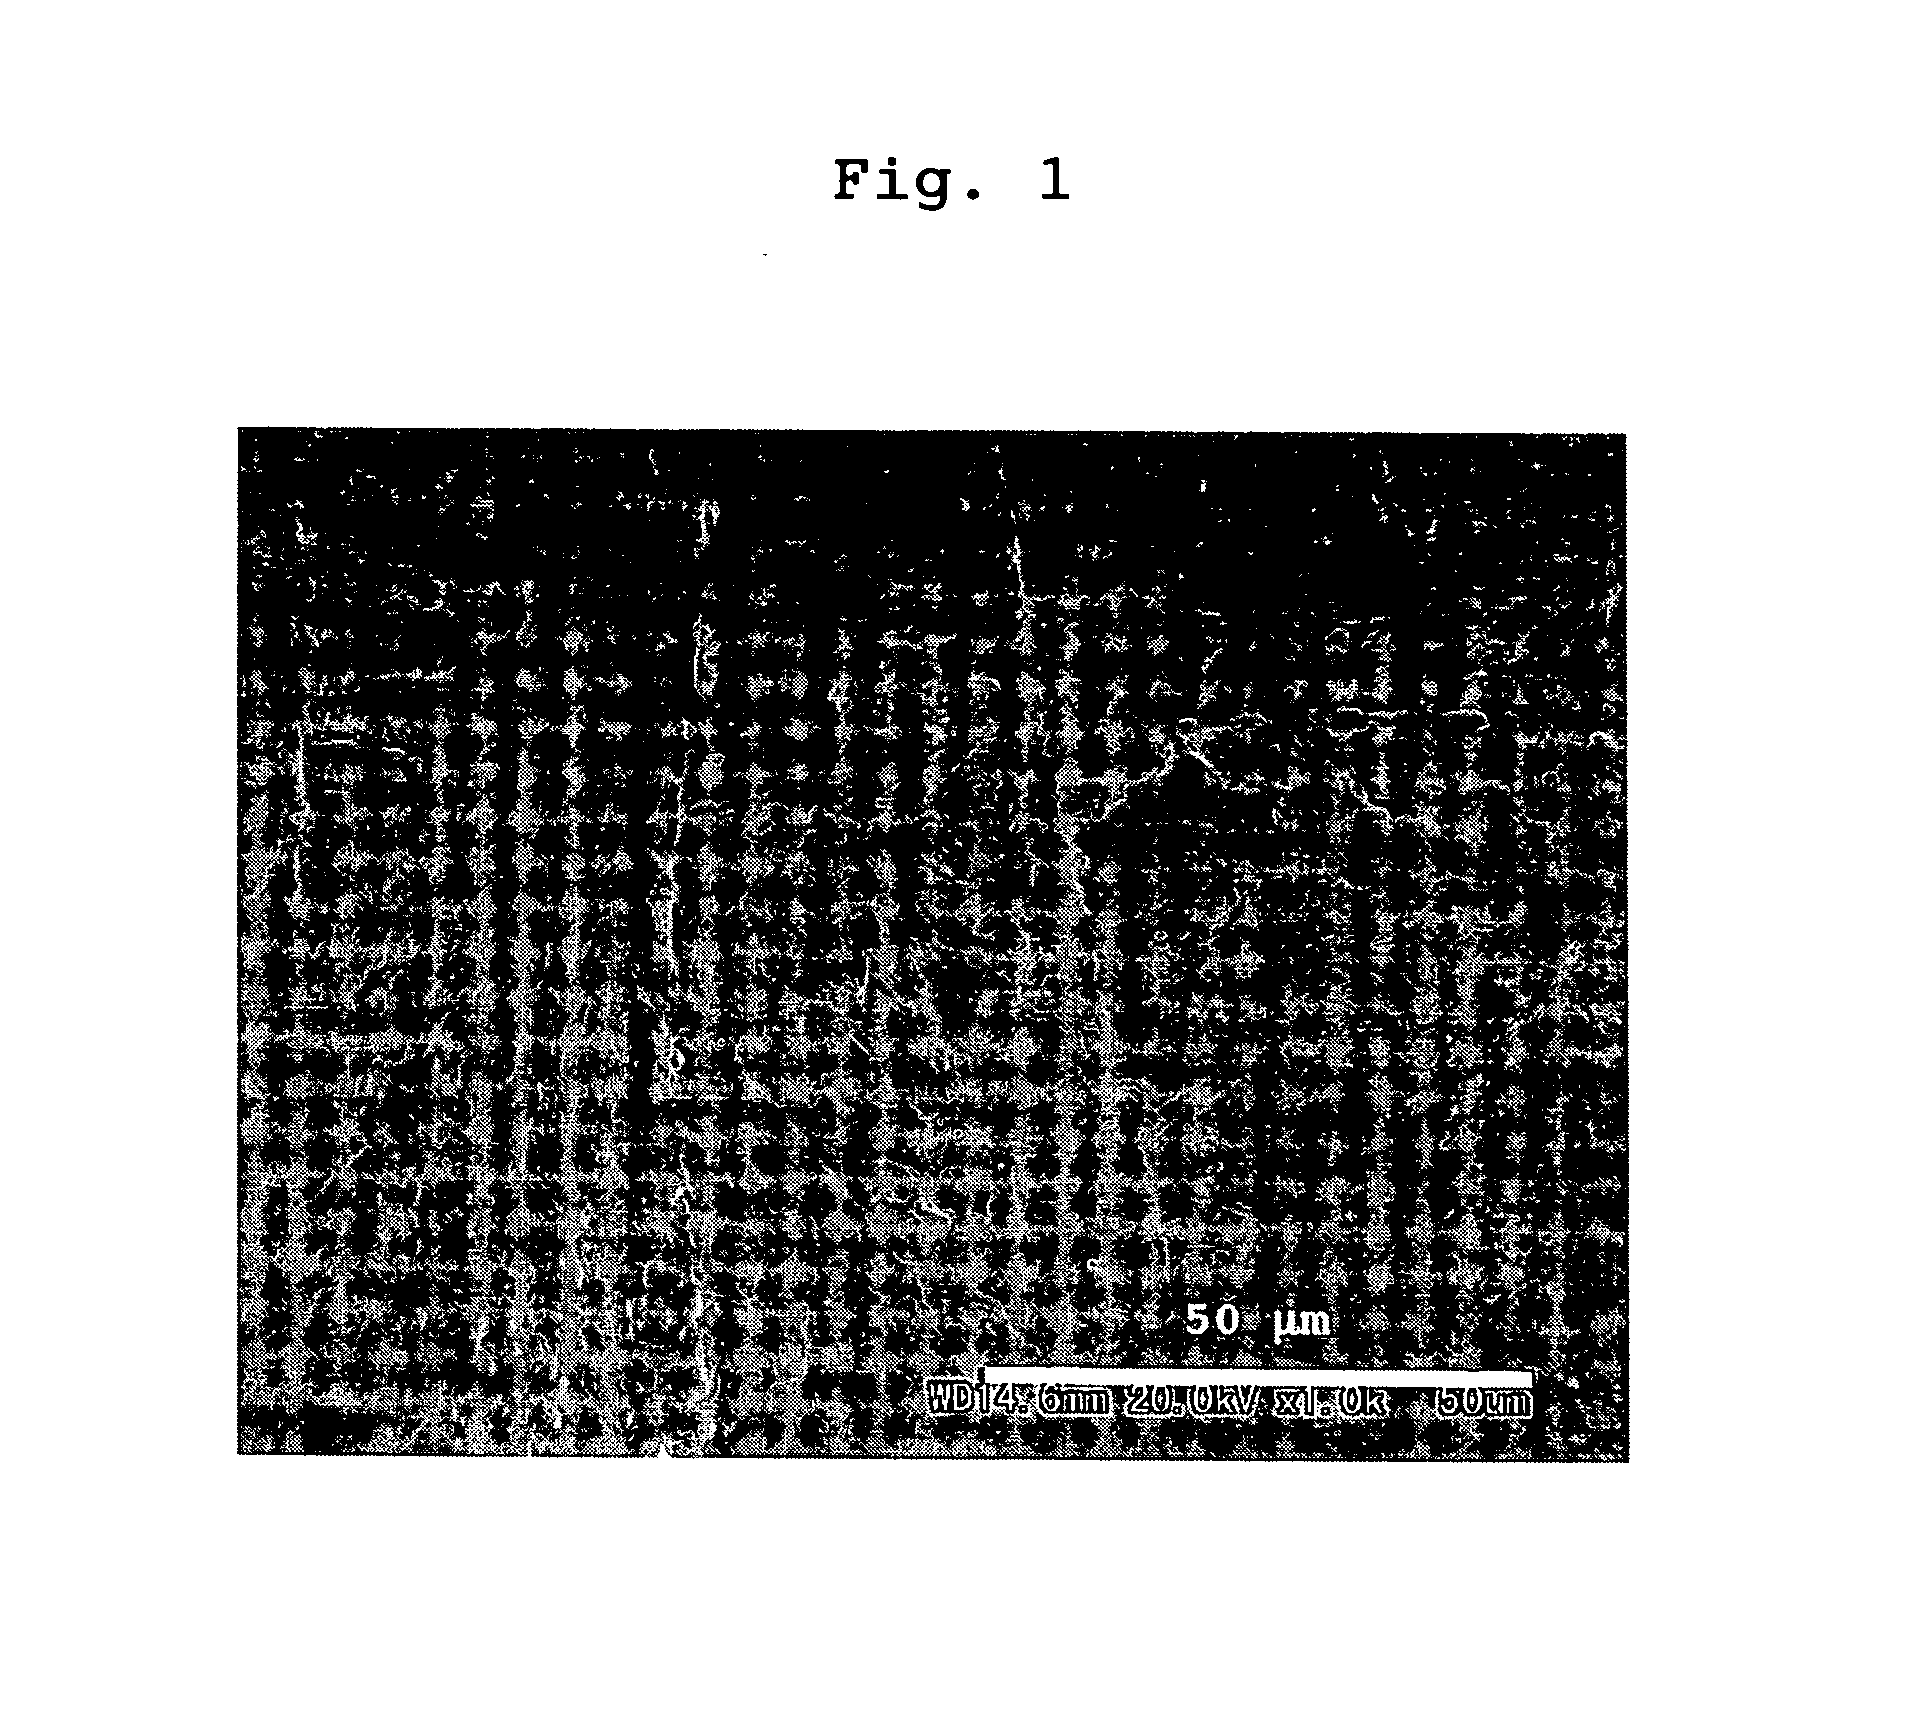 Synthetic polypeptide-containing bioapplicable material and film-forming material